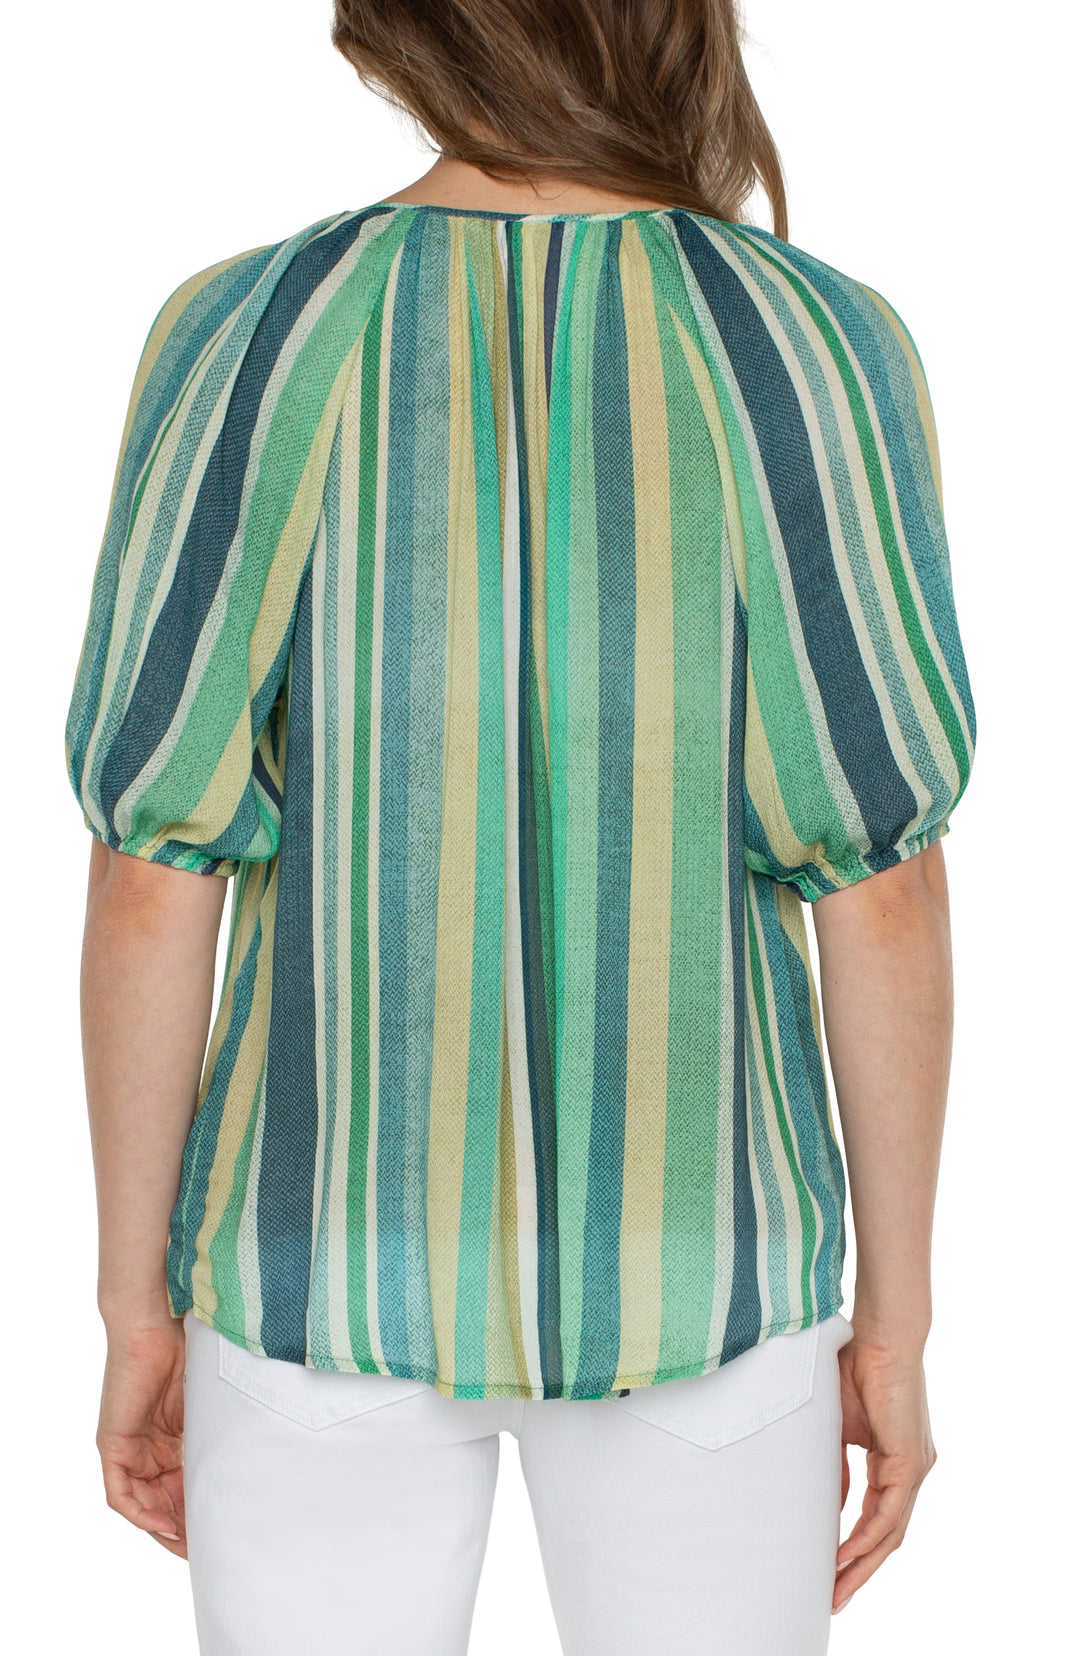 Shirred Short Sleeve Button Front Top - Teal Multi Stripe | Liverpool